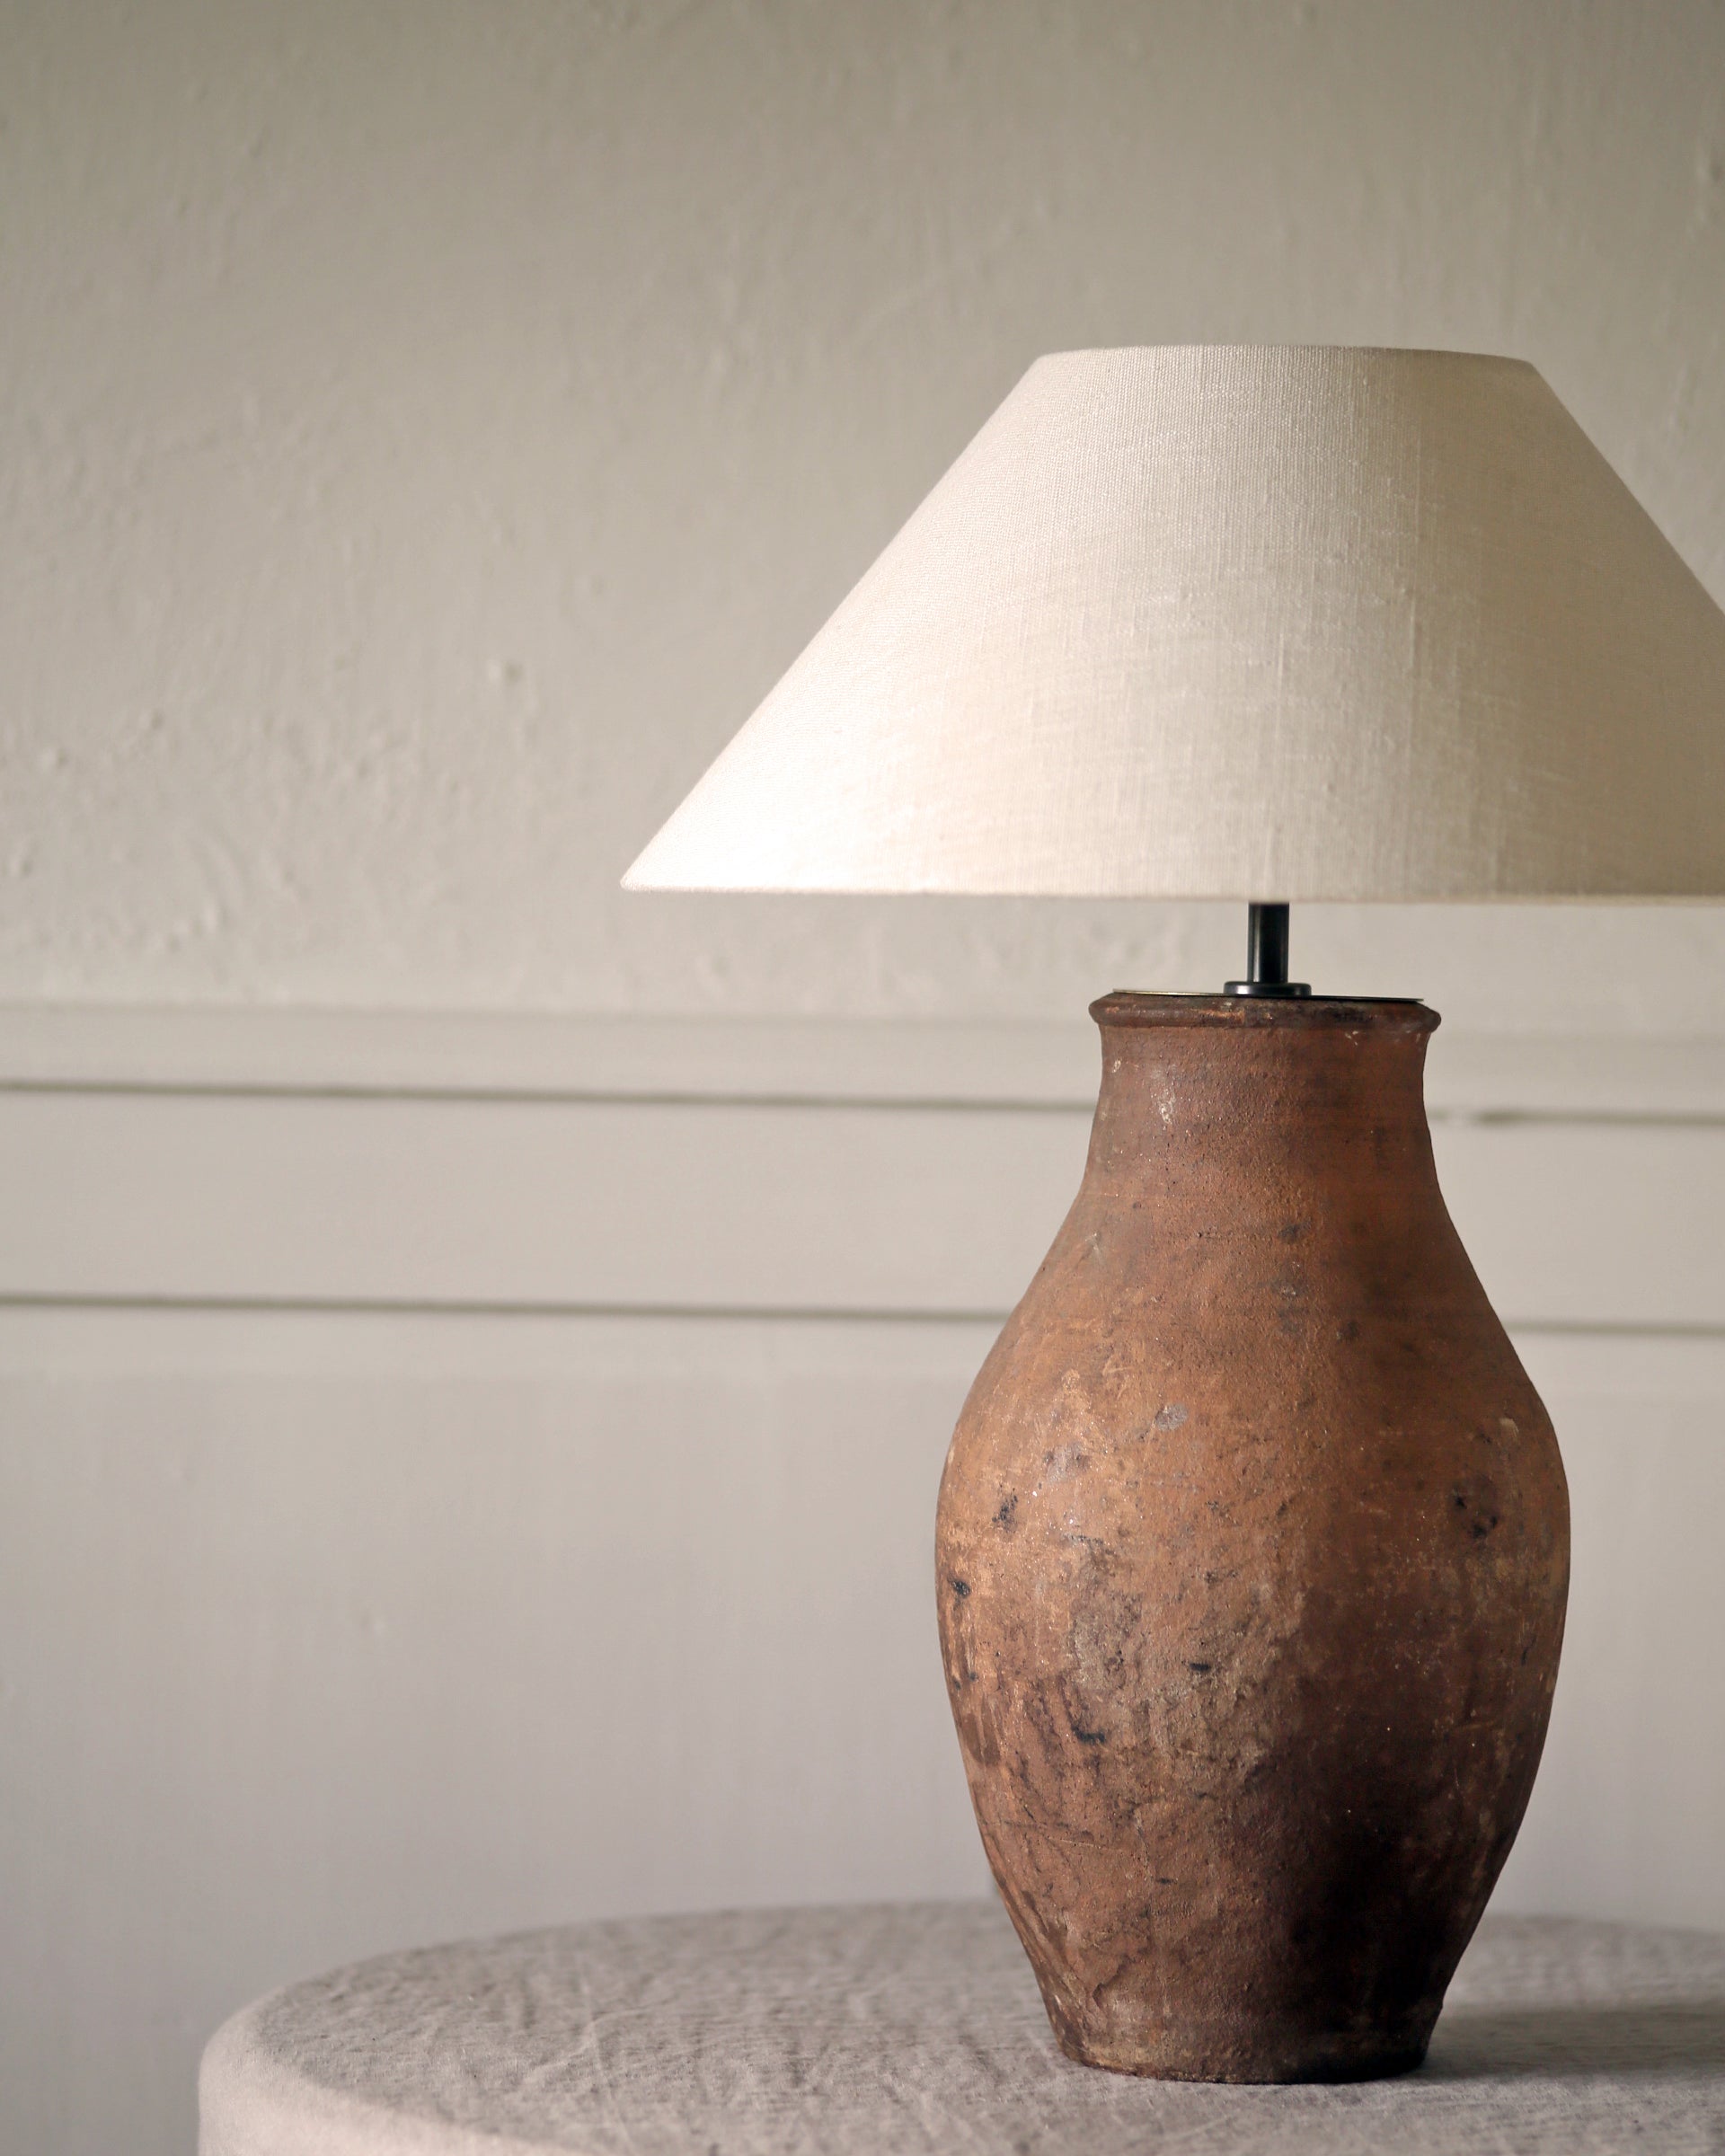 Naturally aged antique pot lamp